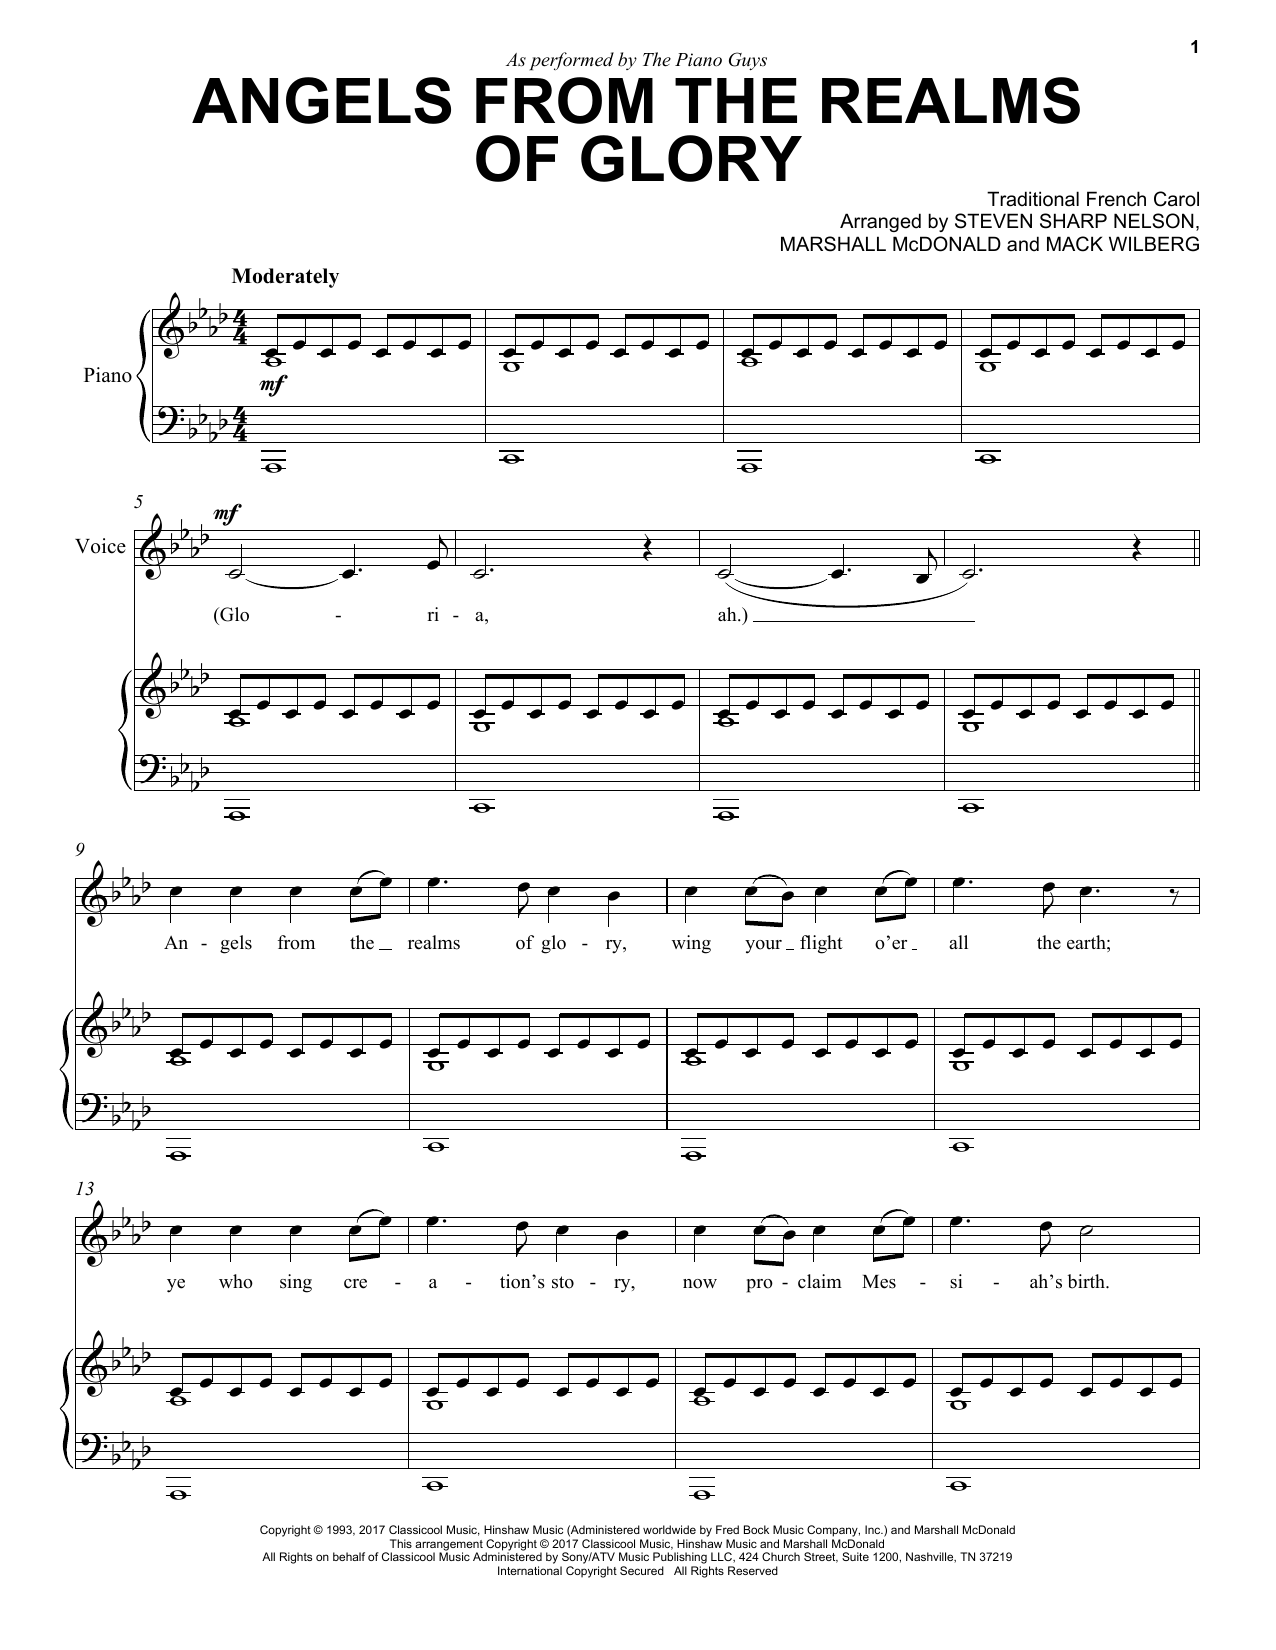 Download The Piano Guys Angels From The Realms Of Glory Sheet Music